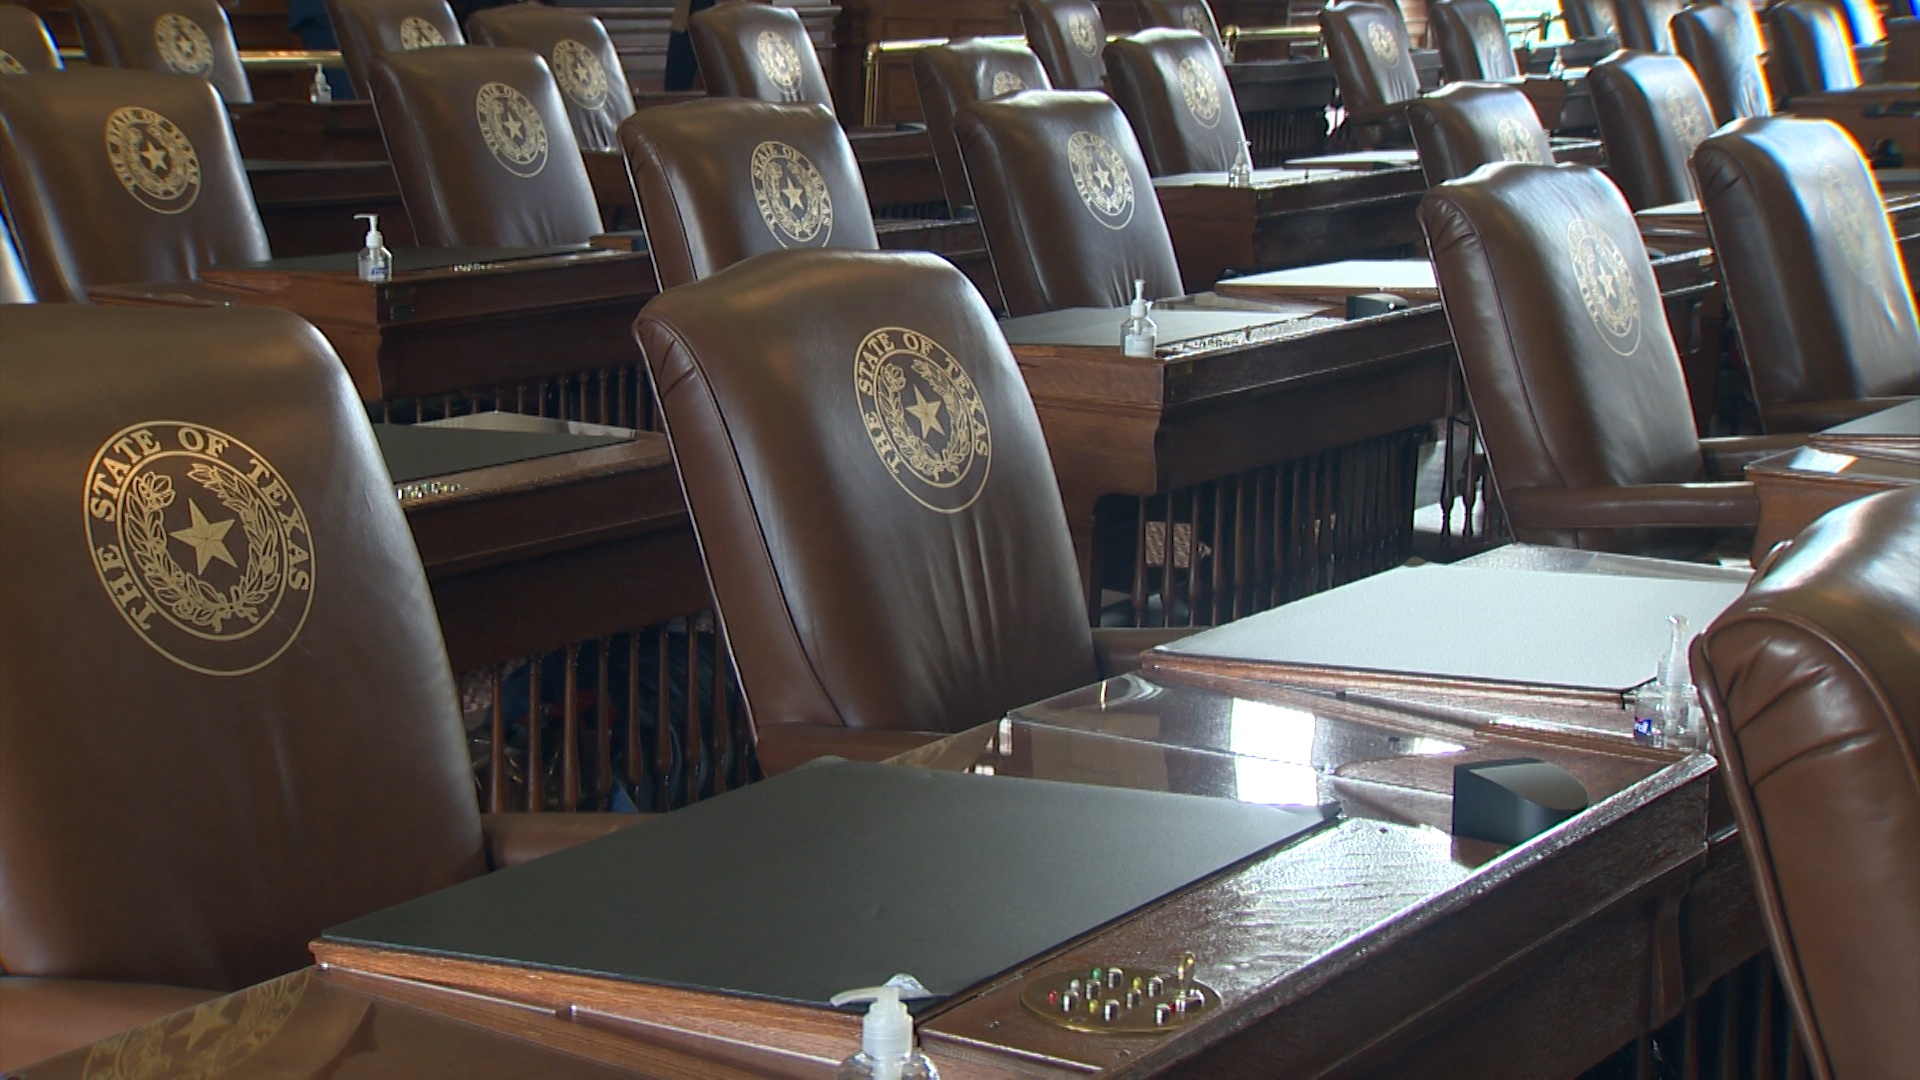 Over the years, legislators have passed some pretty odd laws. Here's a look at a few of them still on the books today.